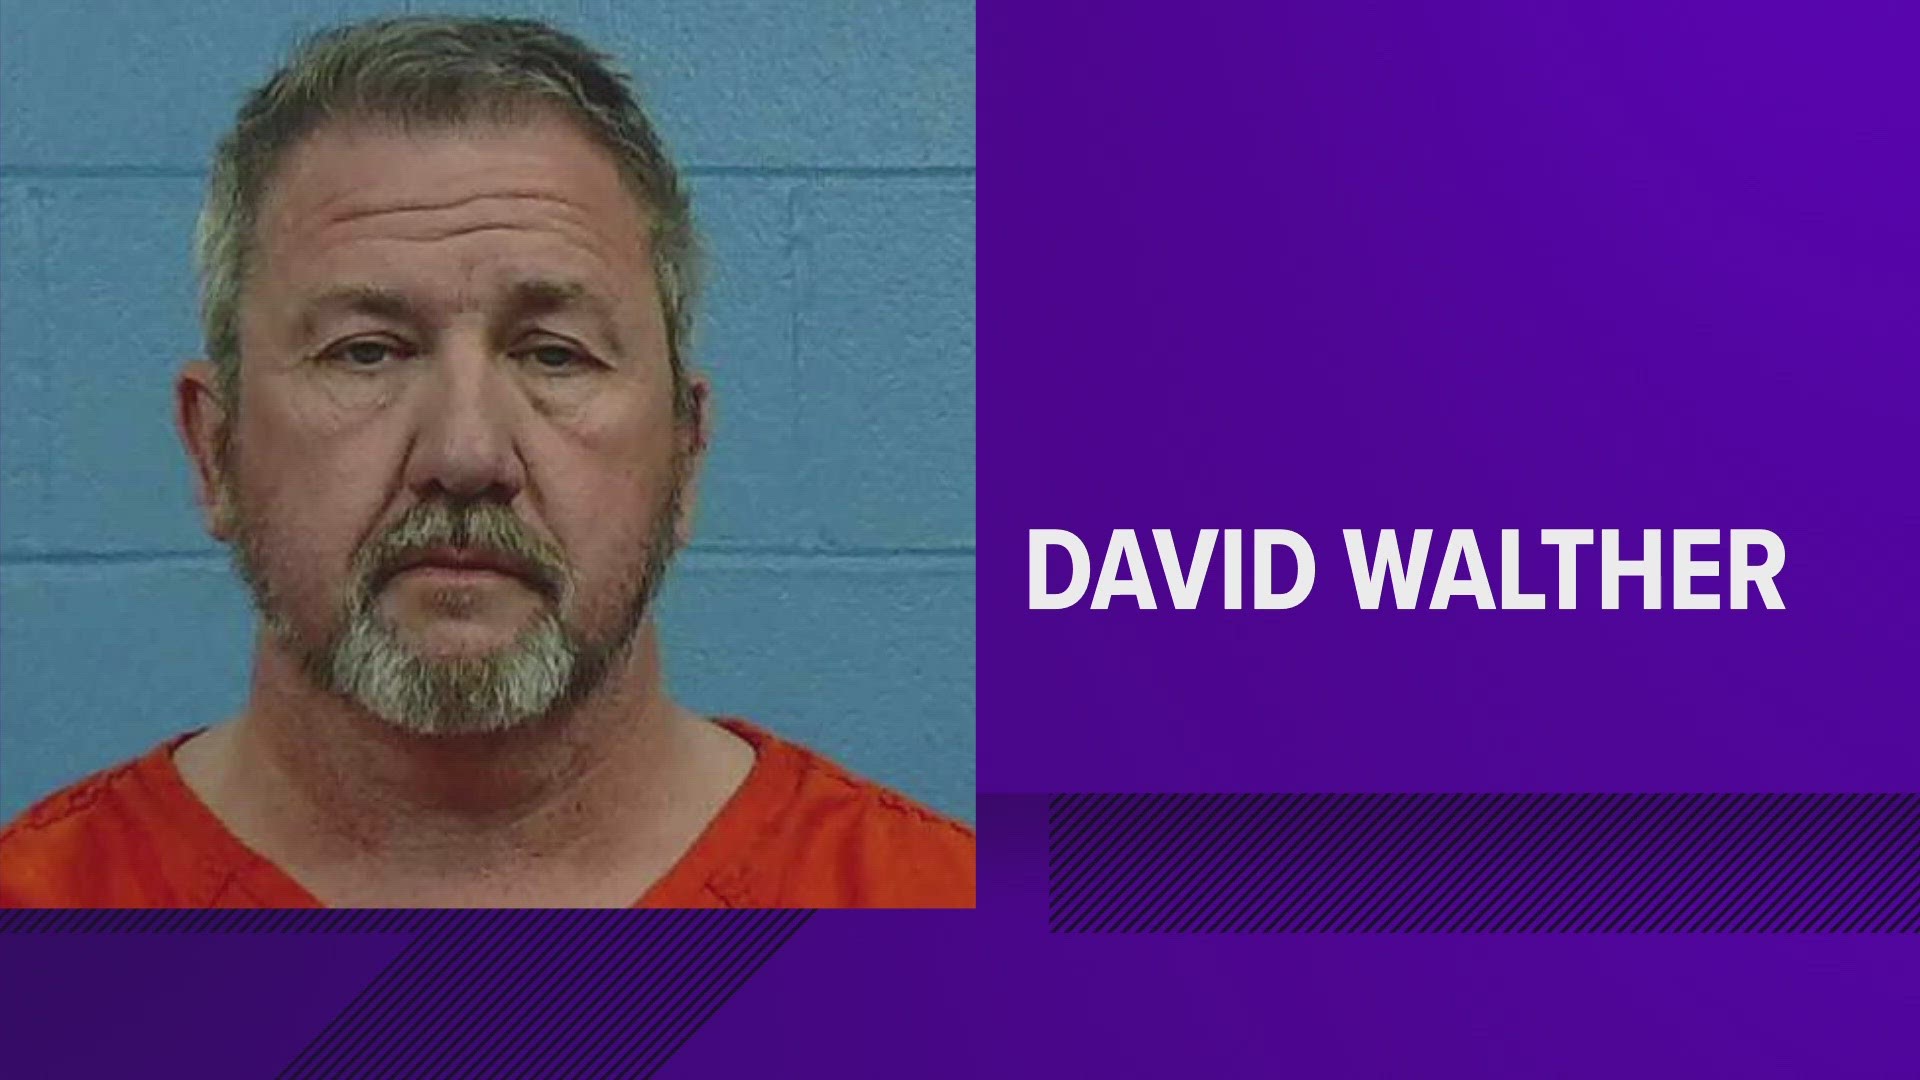 David Lloyd Walther faces up to 20 years in prison and a maximum fine of $250,000.